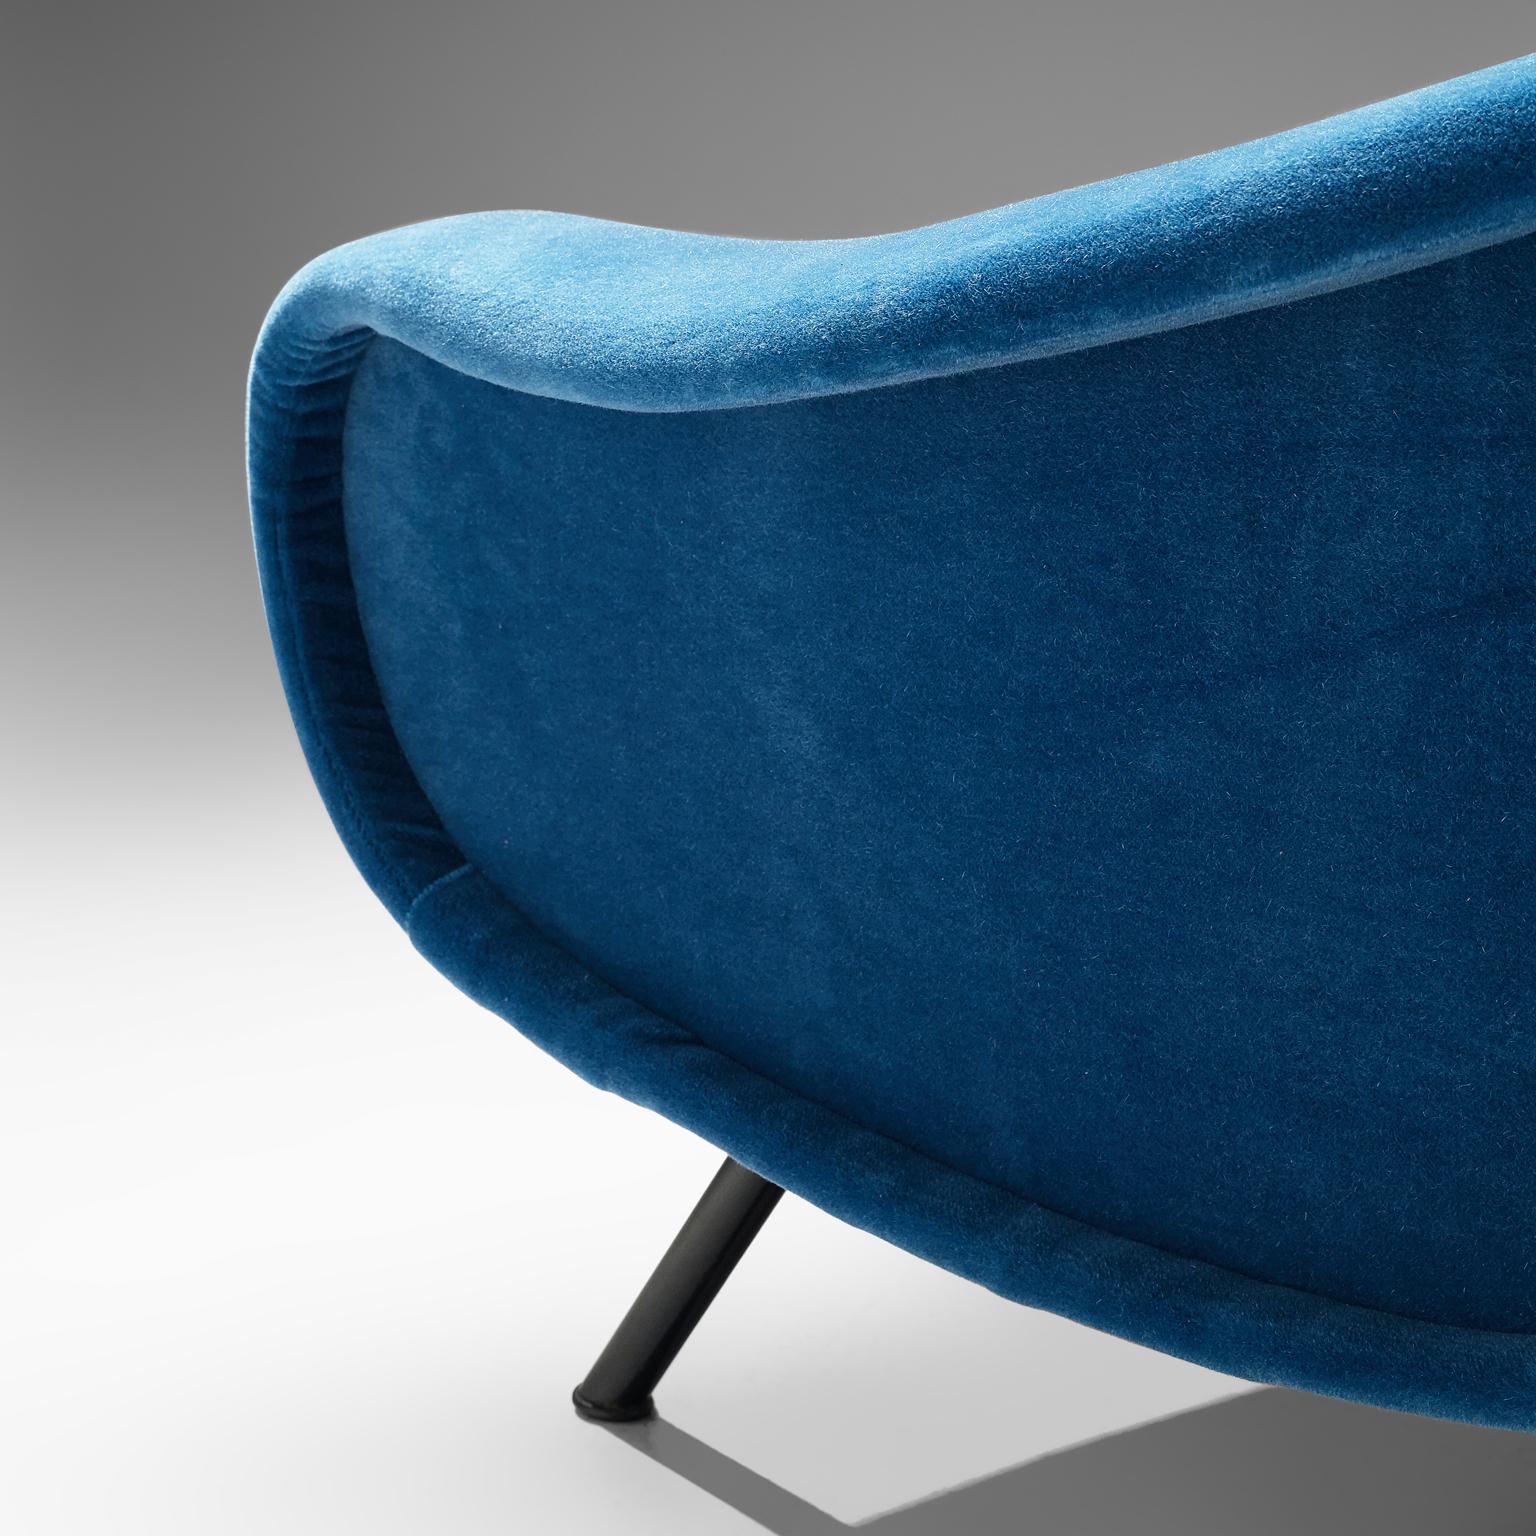 Metal Marco Zanuso Lounge Chair Reupholstered in Blue Mohair 